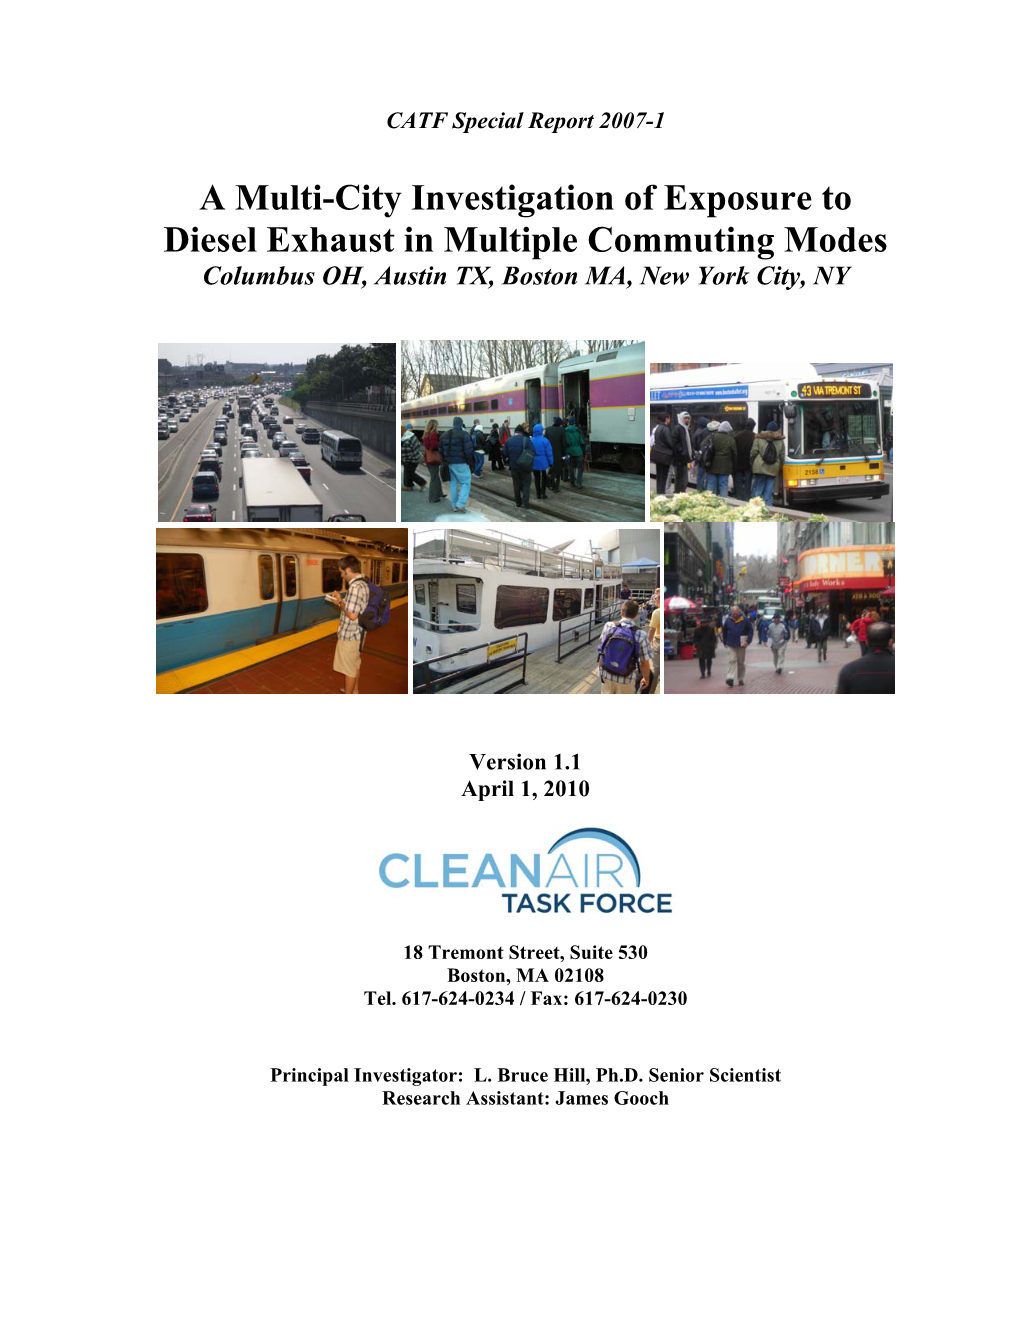 A Multi-City Investigation of Exposure to Diesel Exhaust in Multiple Commuting Modes Columbus OH, Austin TX, Boston MA, New York City, NY